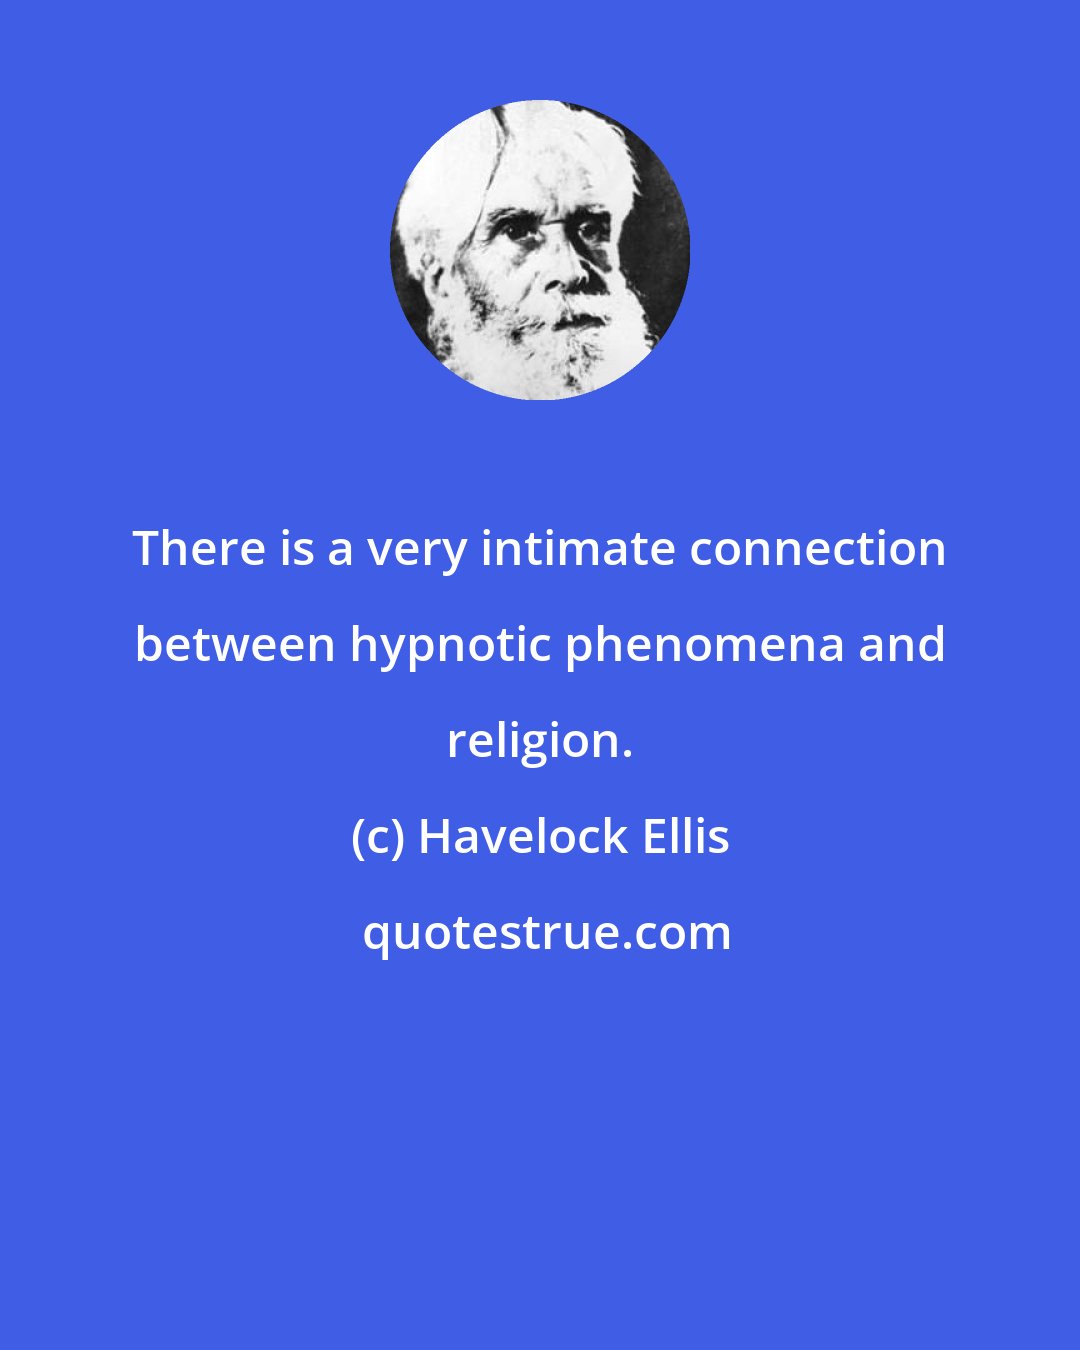 Havelock Ellis: There is a very intimate connection between hypnotic phenomena and religion.